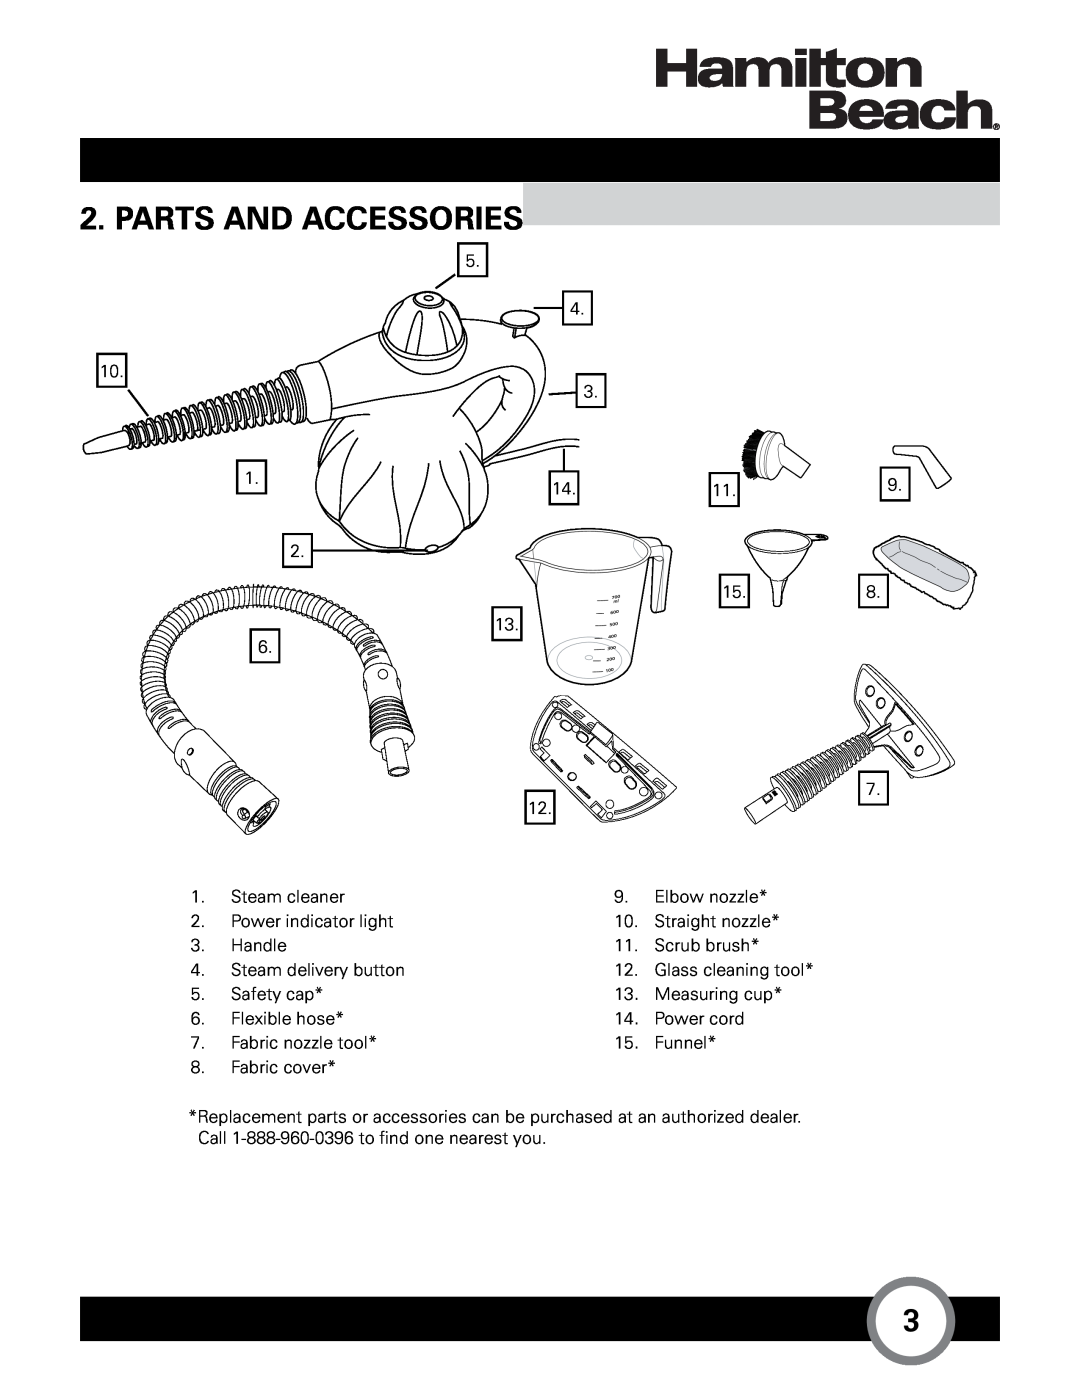 Hamilton Beach HB-165 owner manual Parts And Accessories 